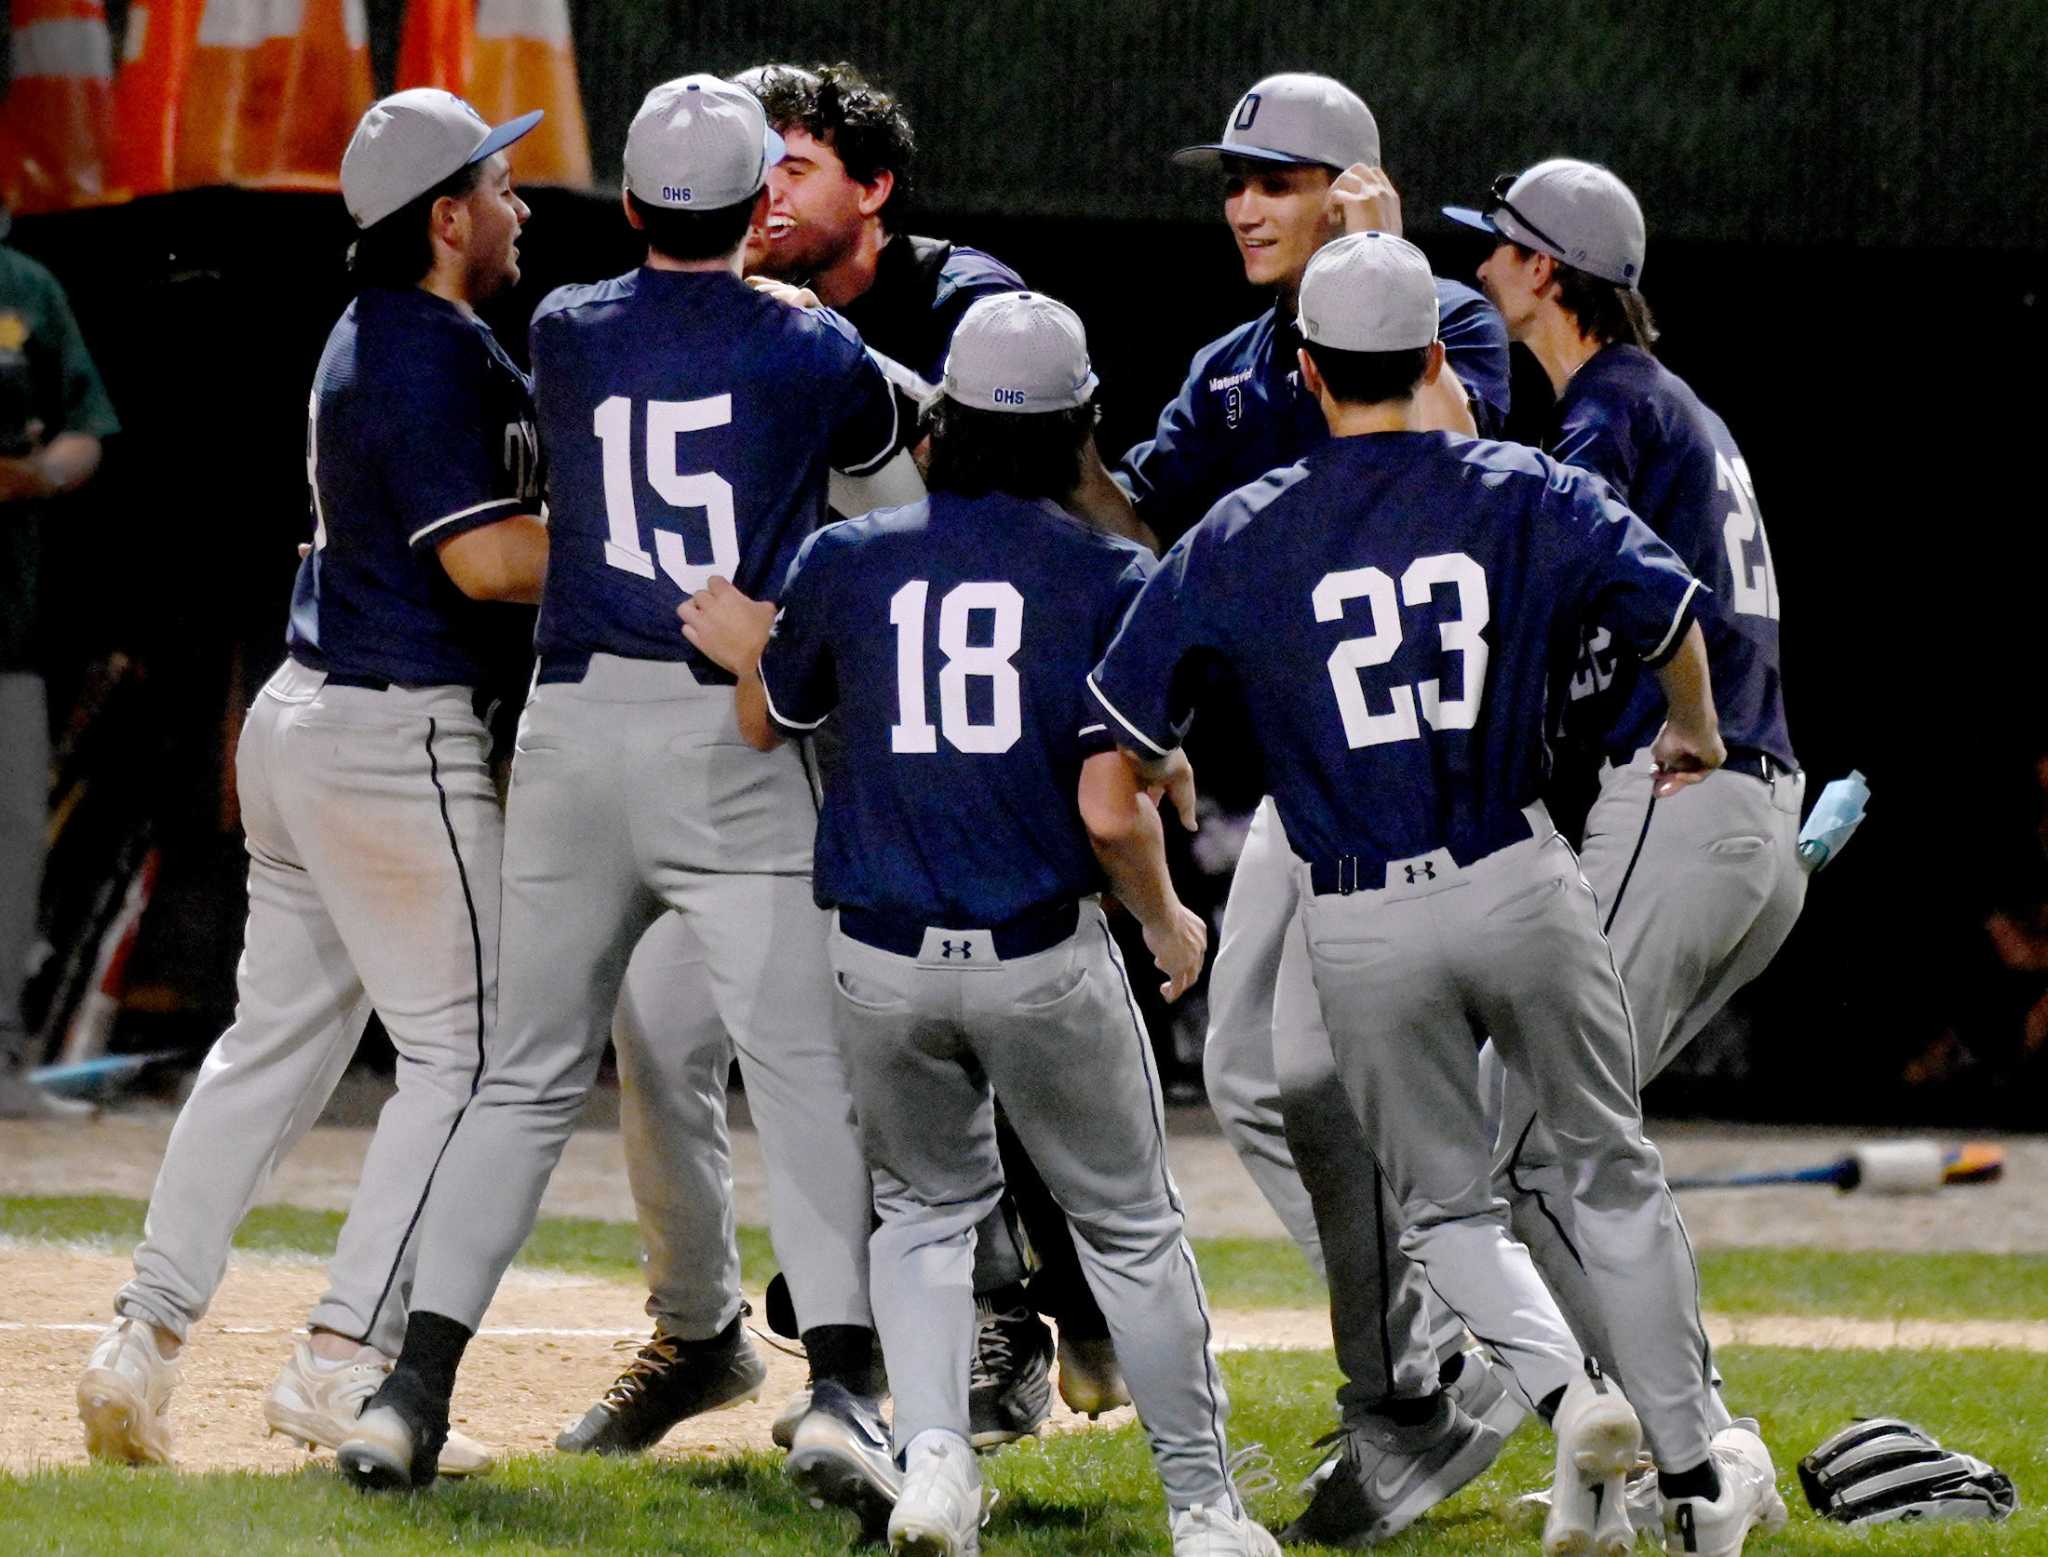 Oxford holds off Holy Cross rally in bottom 7th, holds on for Naugatuck Valley League baseball crown